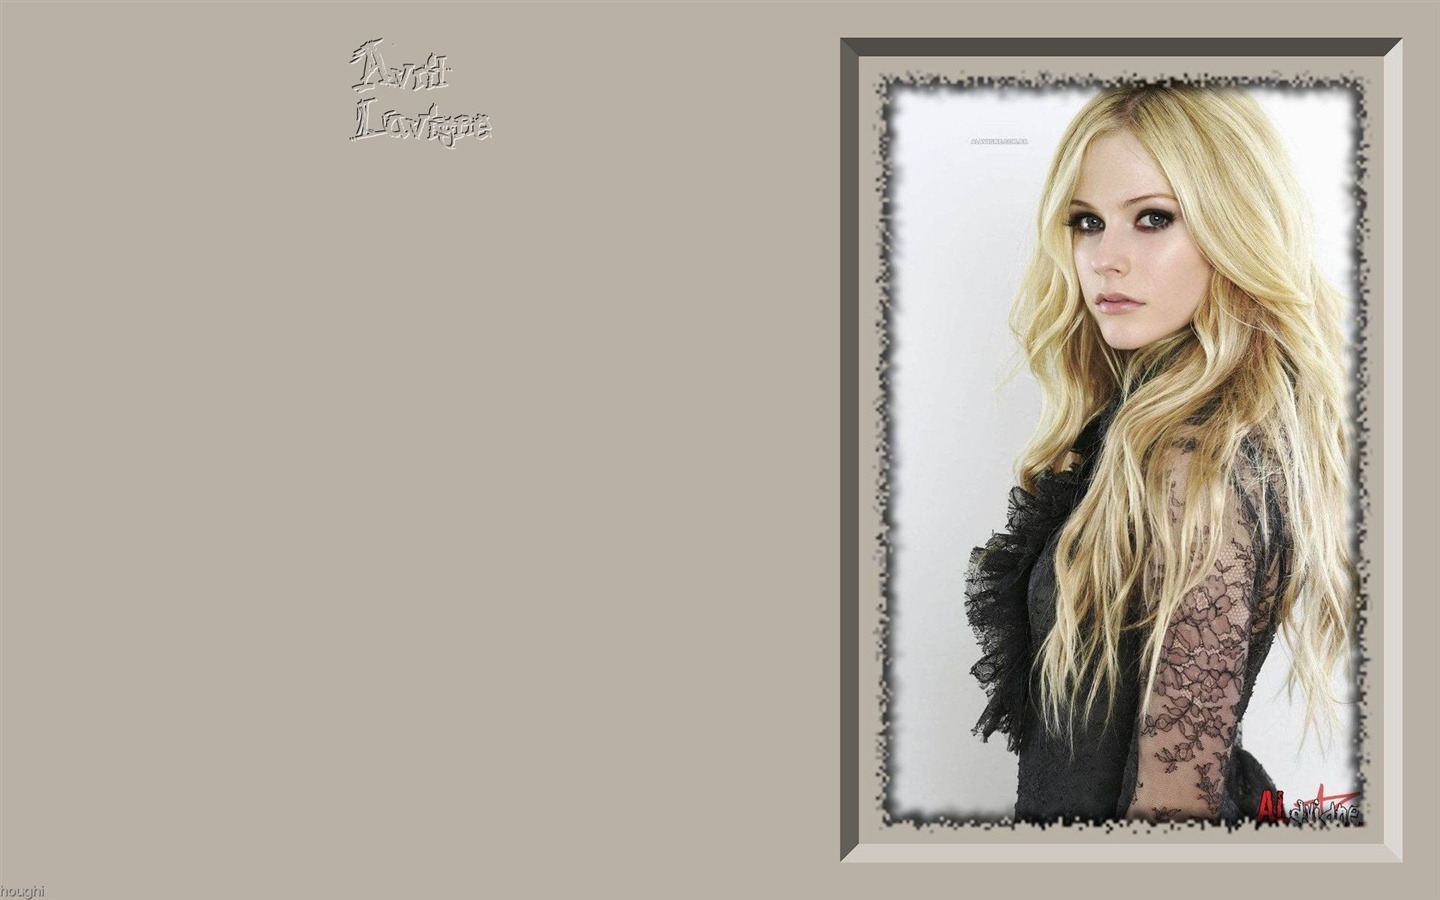 Avril Lavigne #066 - 1440x900 Wallpapers Pictures Photos Images